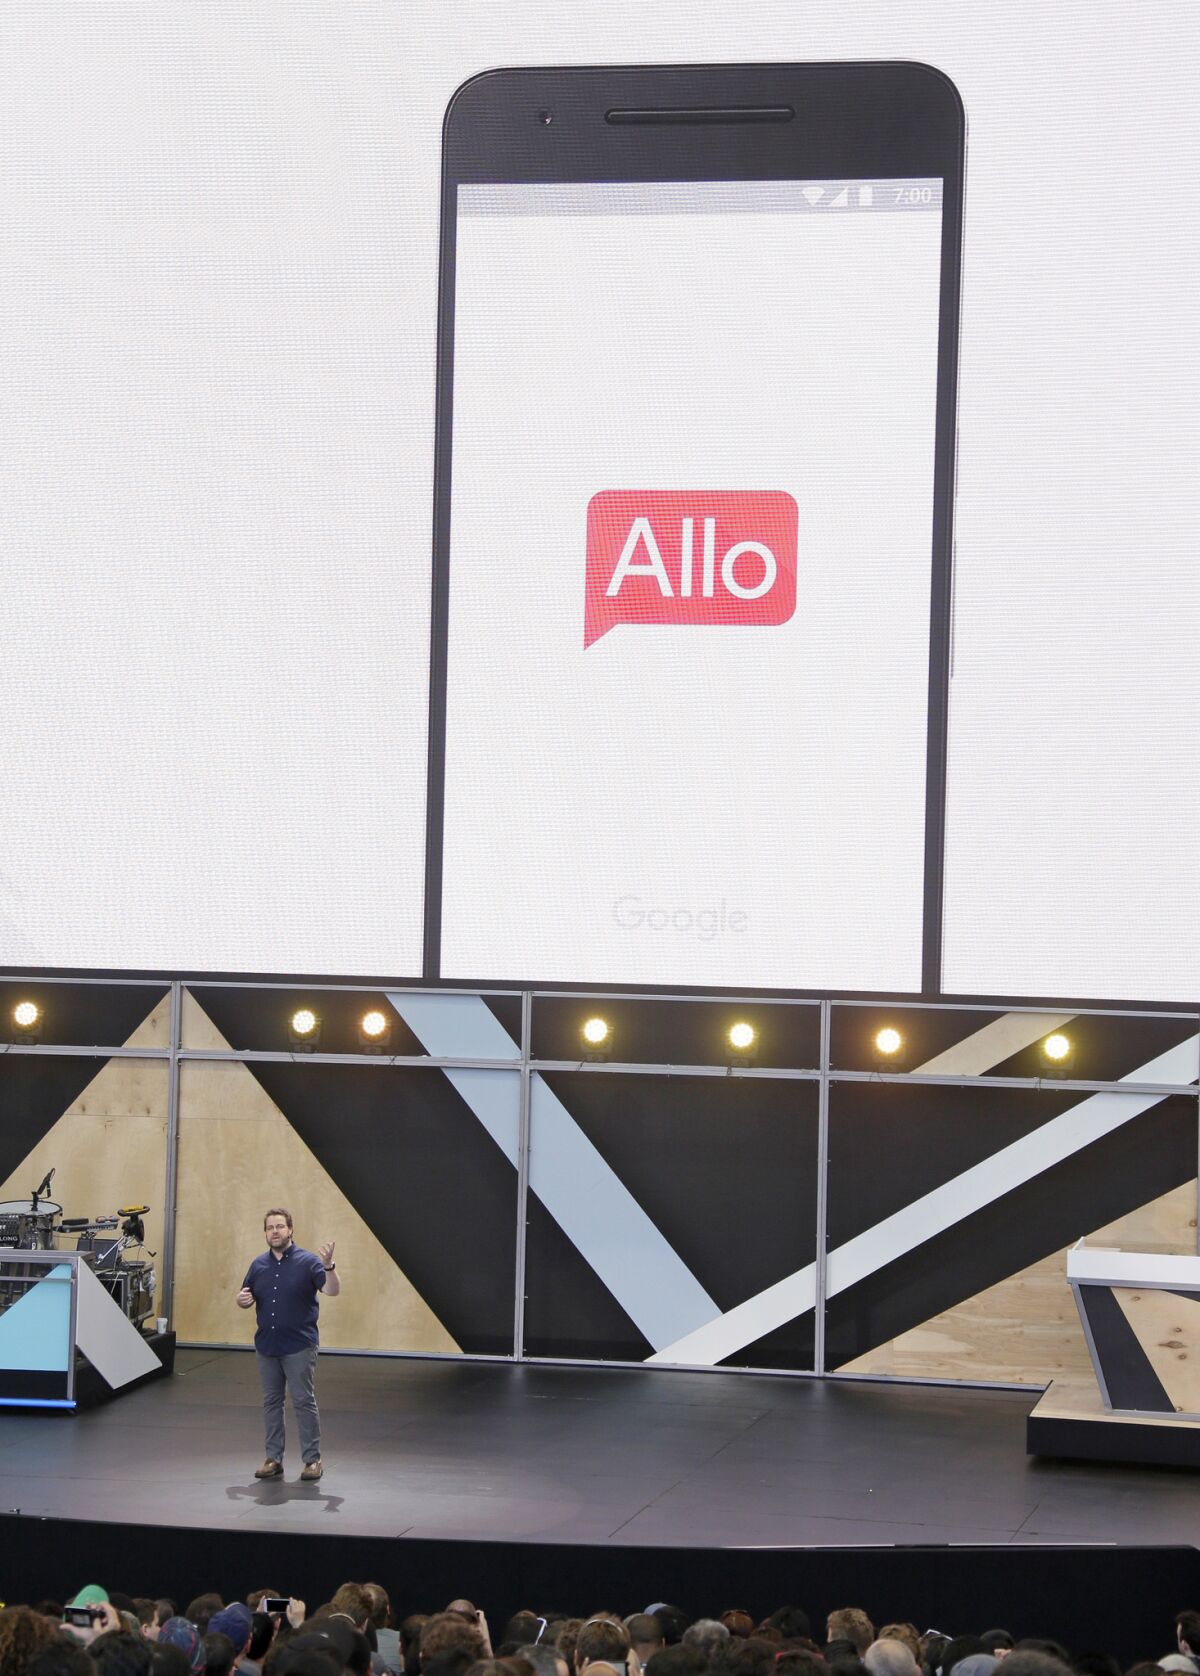 Google engineering director Erik Kay talks about the new Allo messaging app at the Google I/O conference last week.